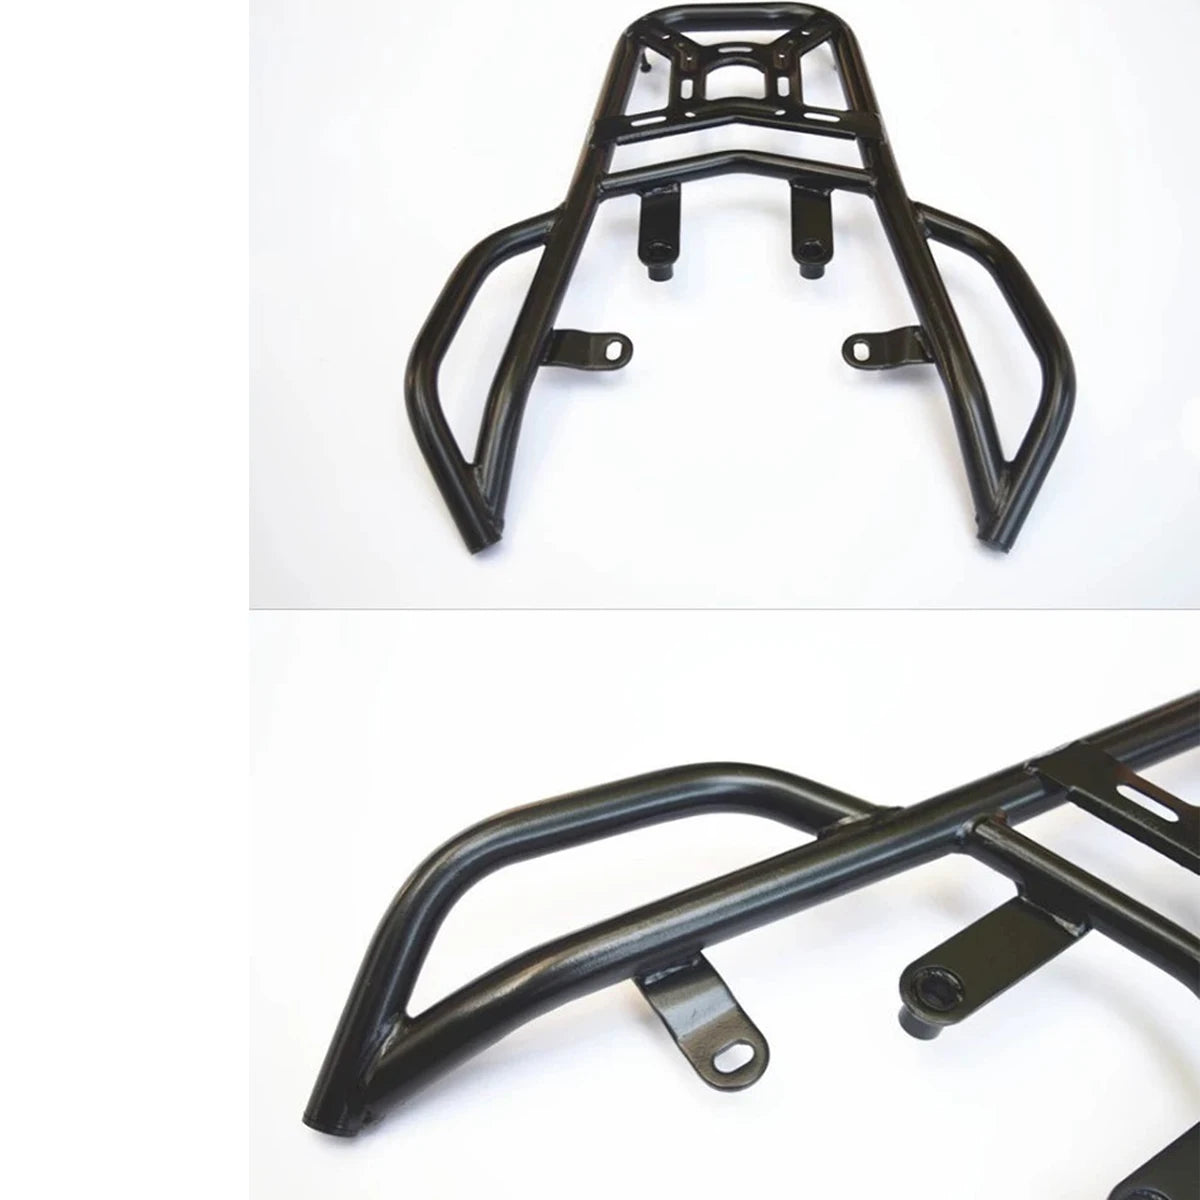 For CFMOTO CF 650MT MT650 MT 650 MT Accessories Motorcycle Rear Luggage Rack Carrier Trunk Box Holder Support Shelf Bracket Grip